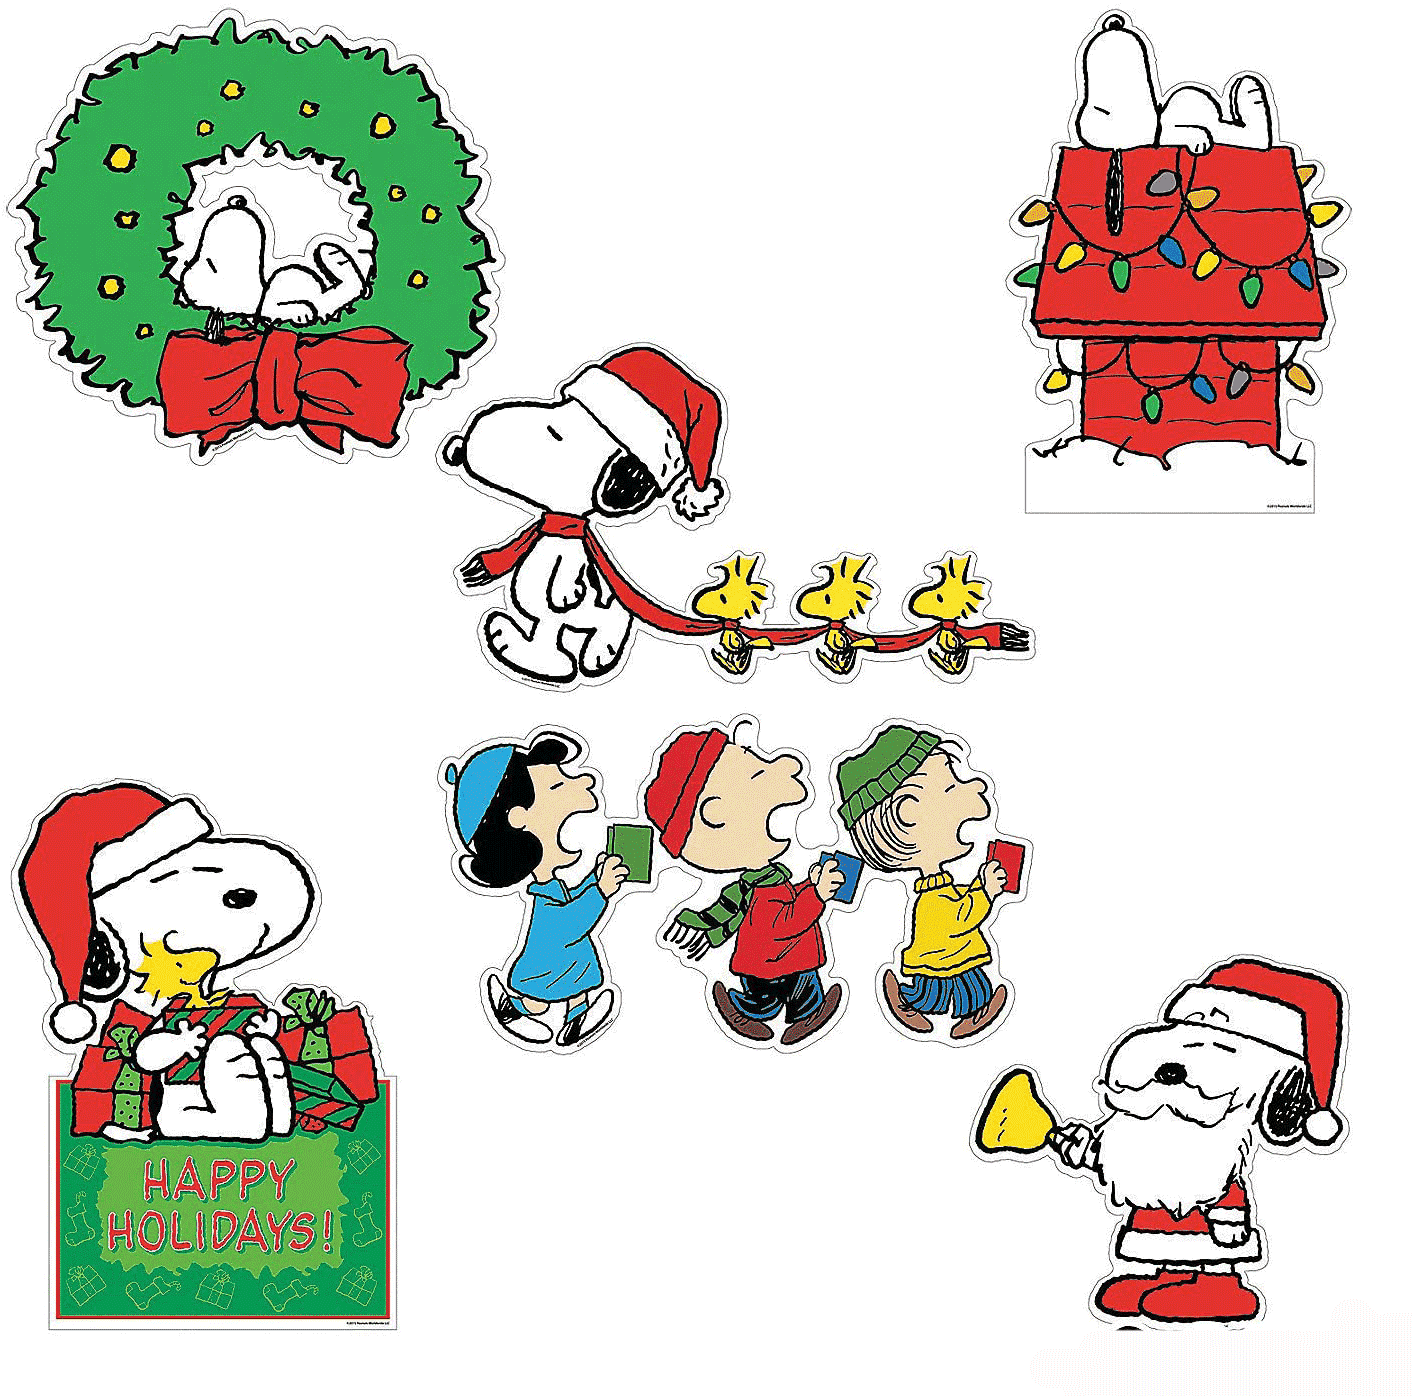 Charlie Brown Lucy Snoopy Sally Woodstock Ice Skating ChristmasTime Is Here Card 